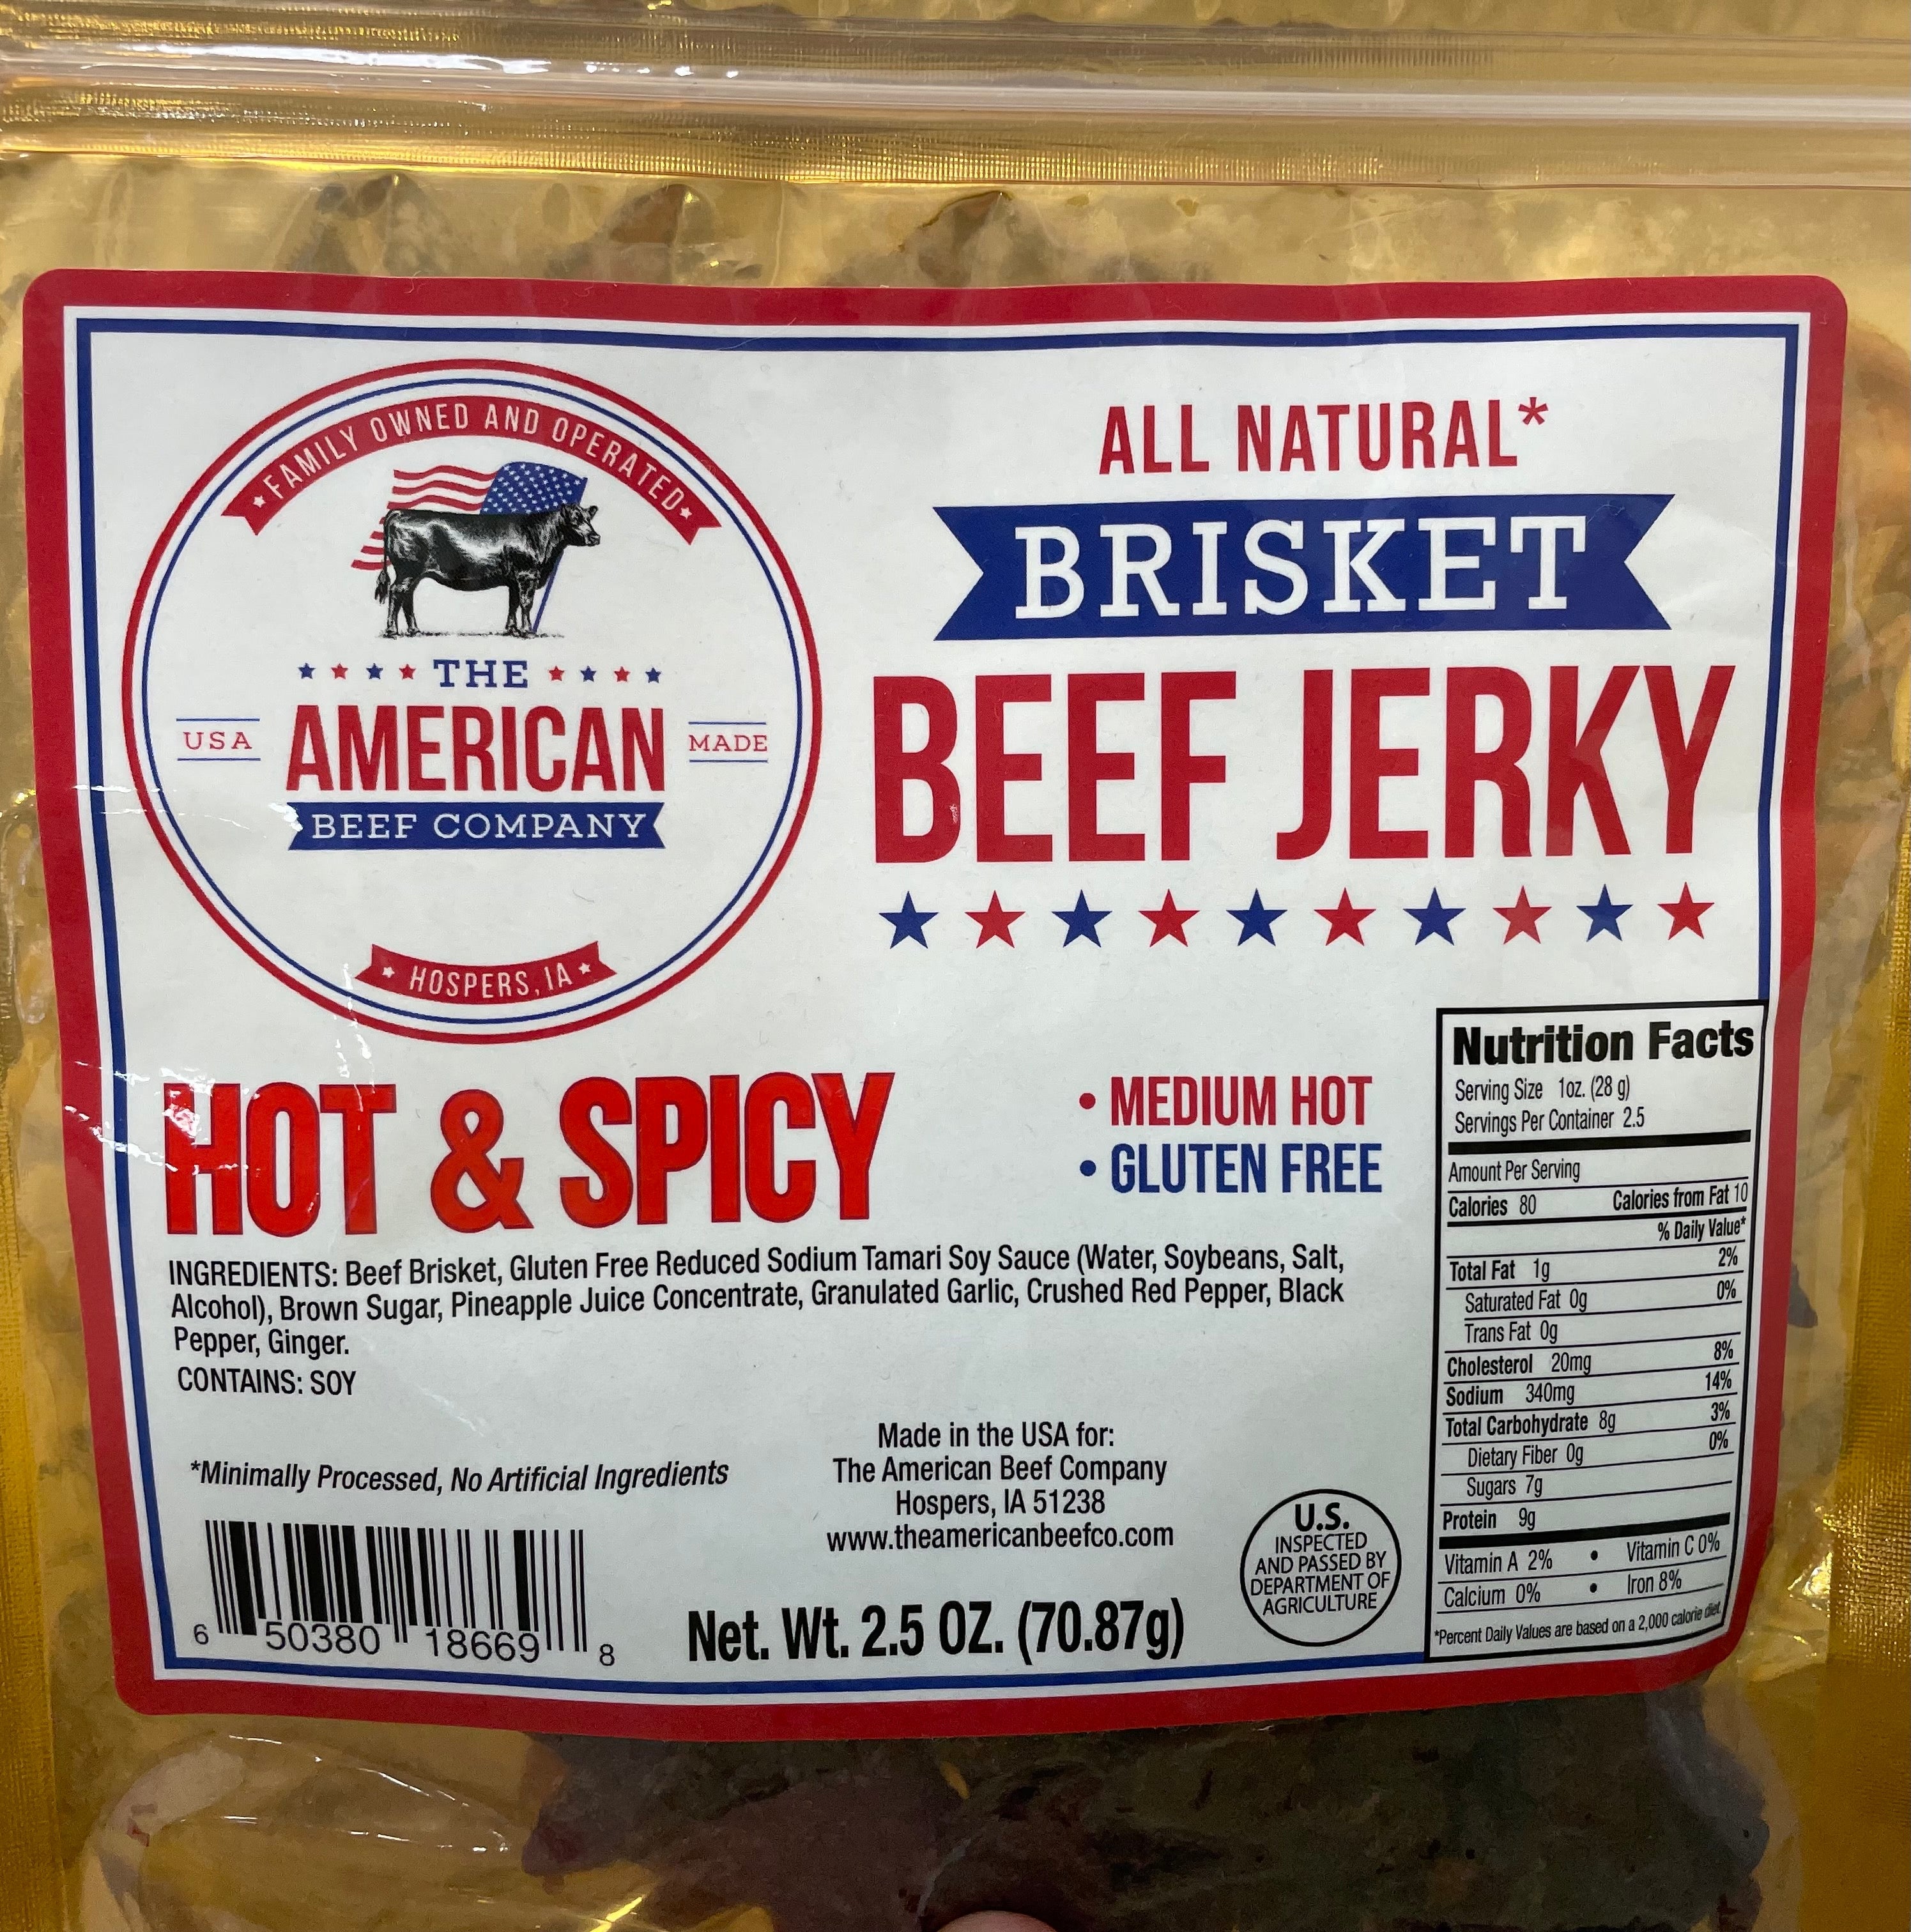 Close up shot of American Beef Company Brisket Beef Jerky product label of hot & spicy